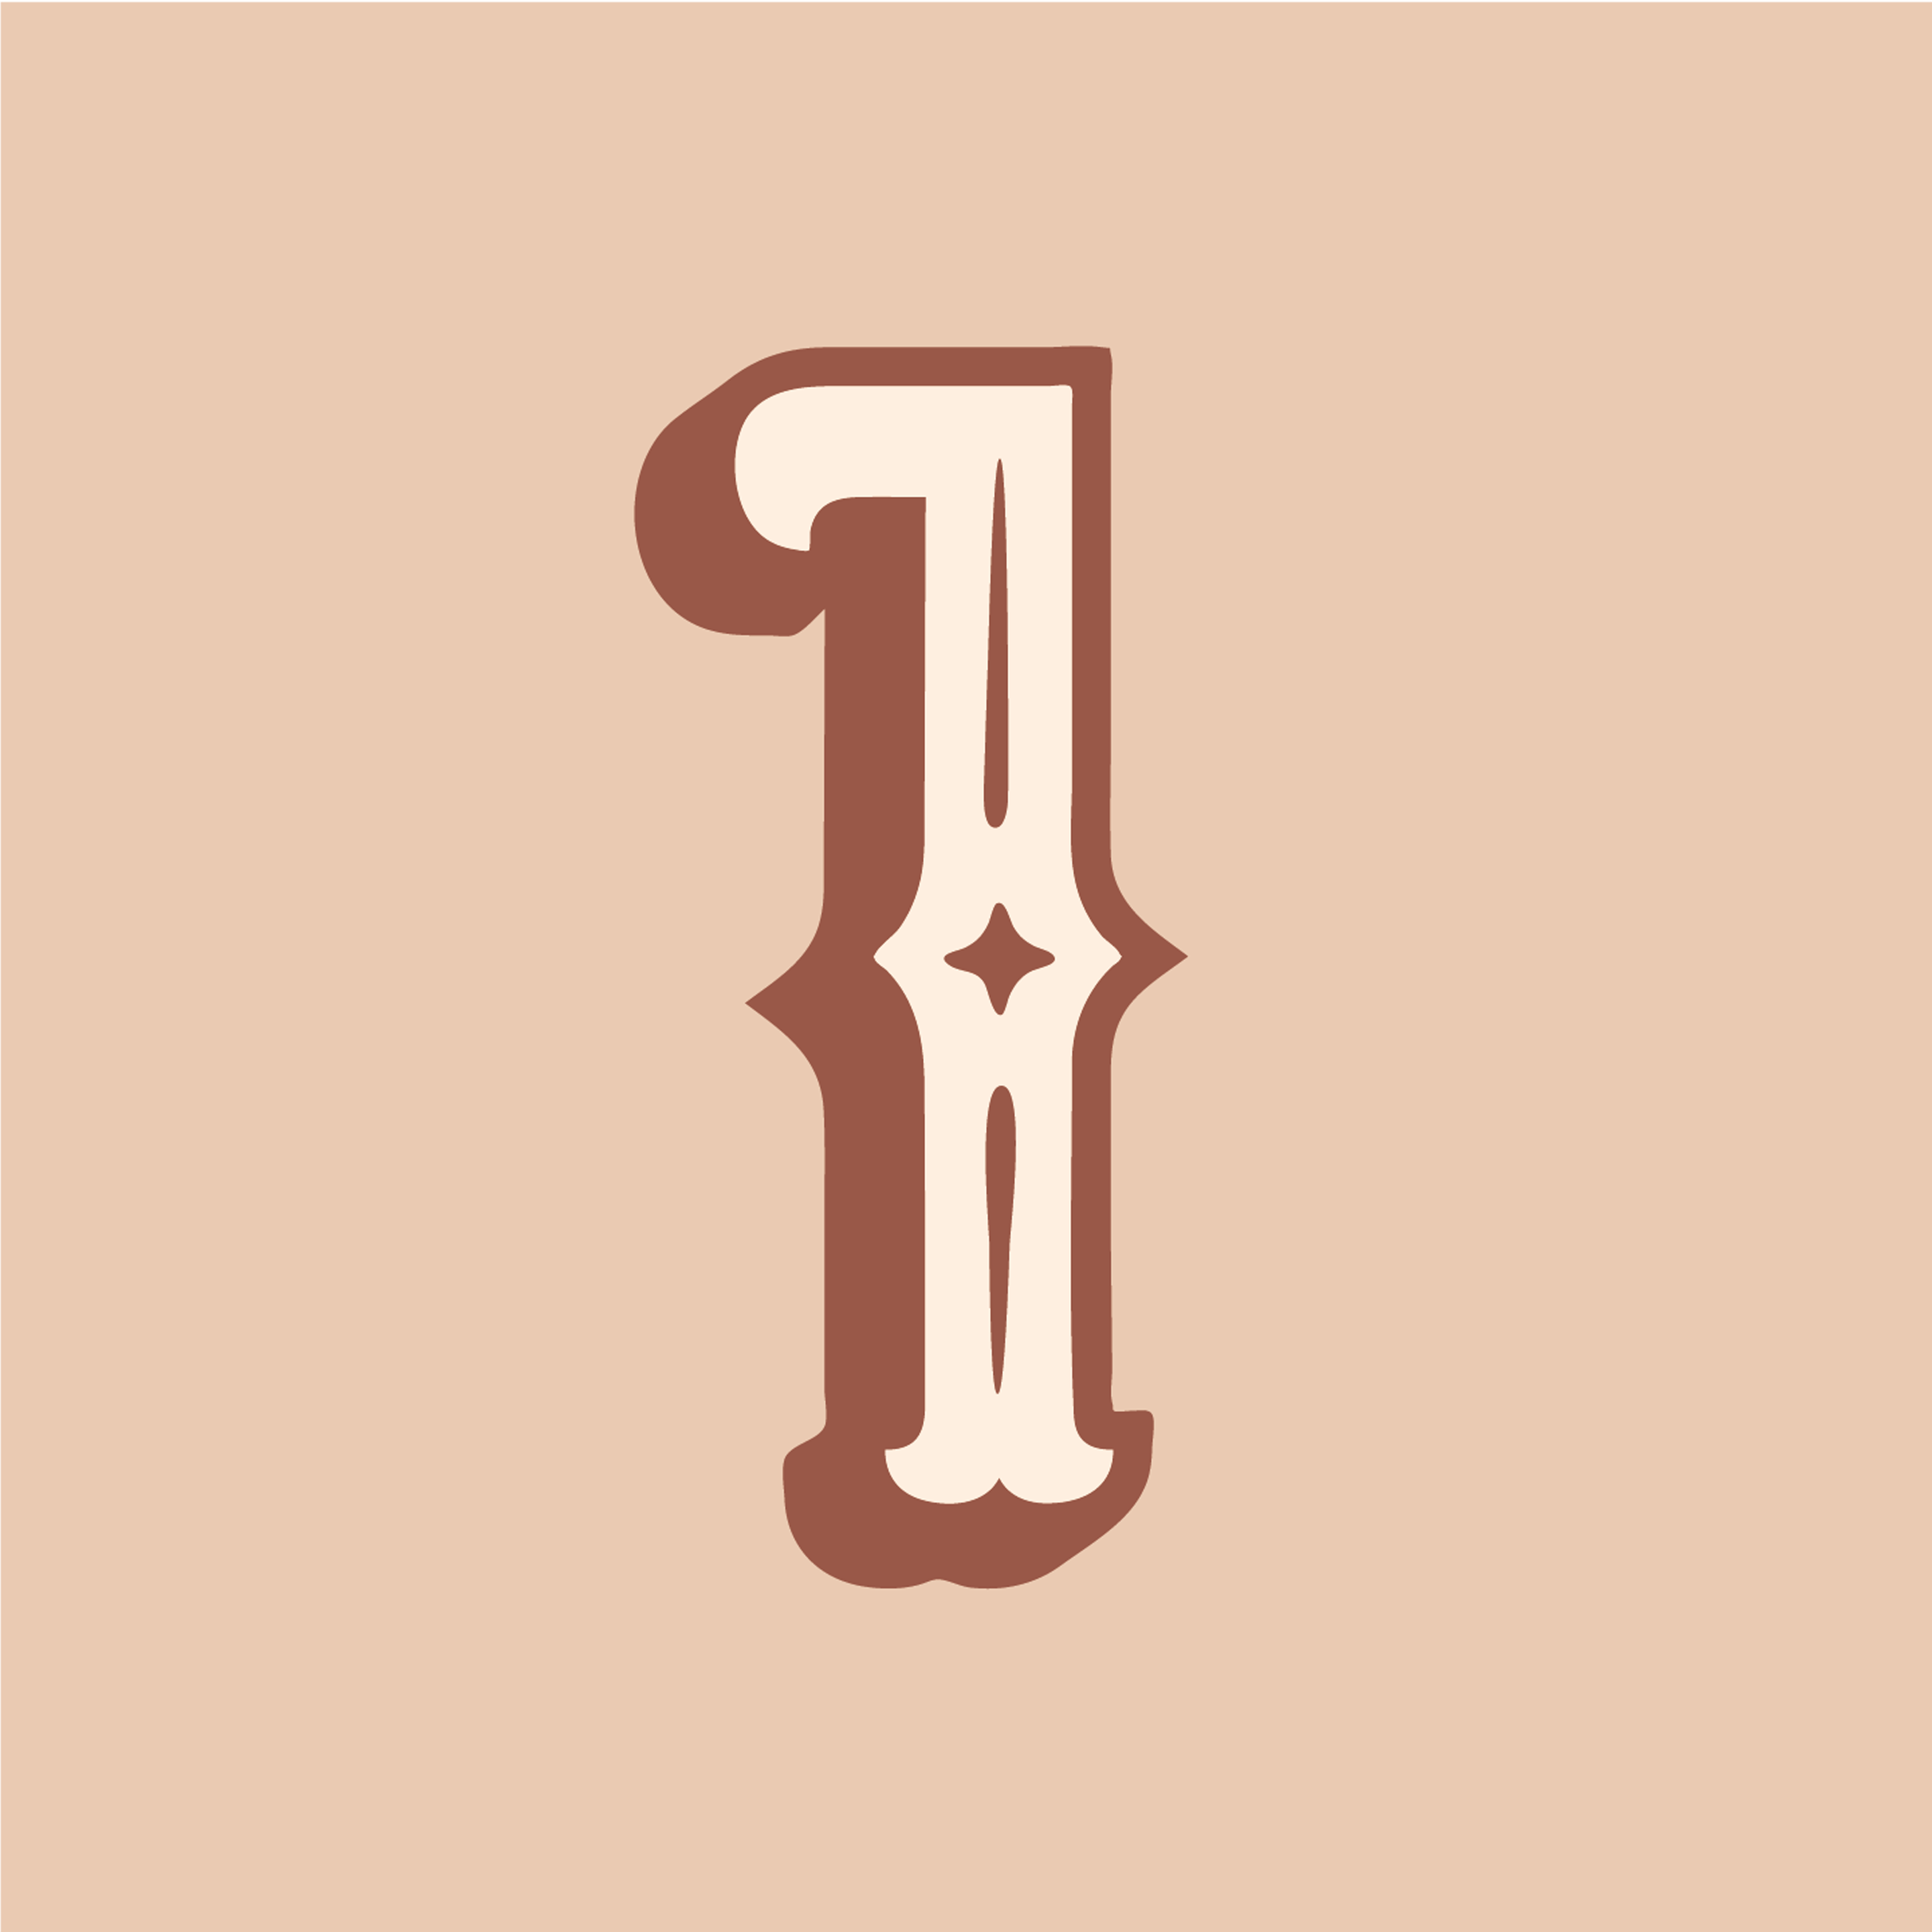 western-style-number-1-design-theme